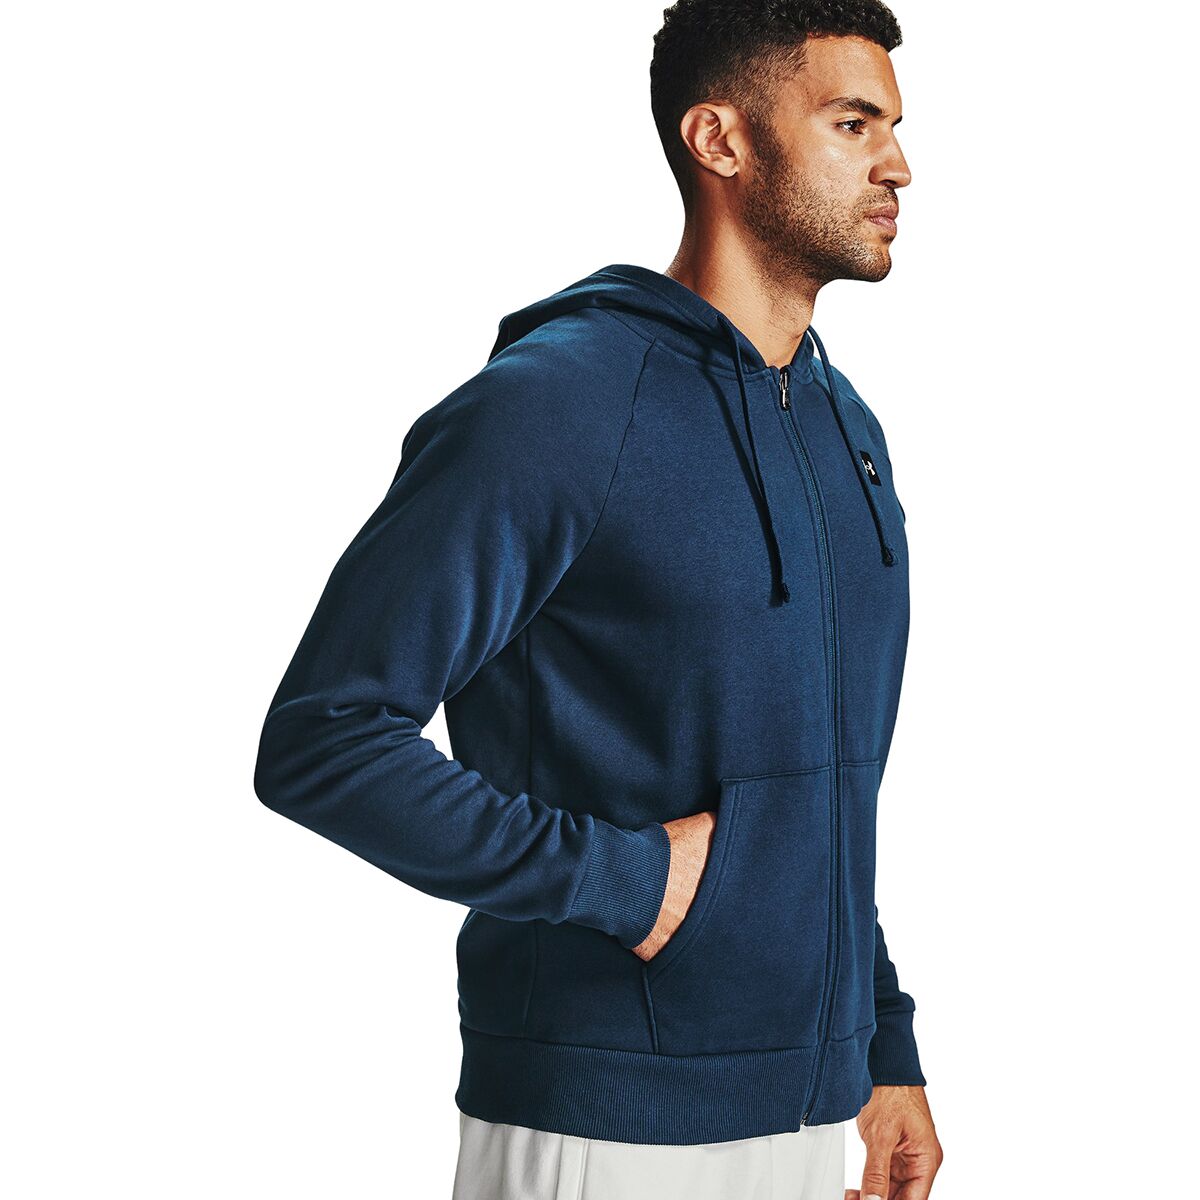 Details about   Under Armour Men's Rival Fleece Fitted Full Zip Hoodie 1302290